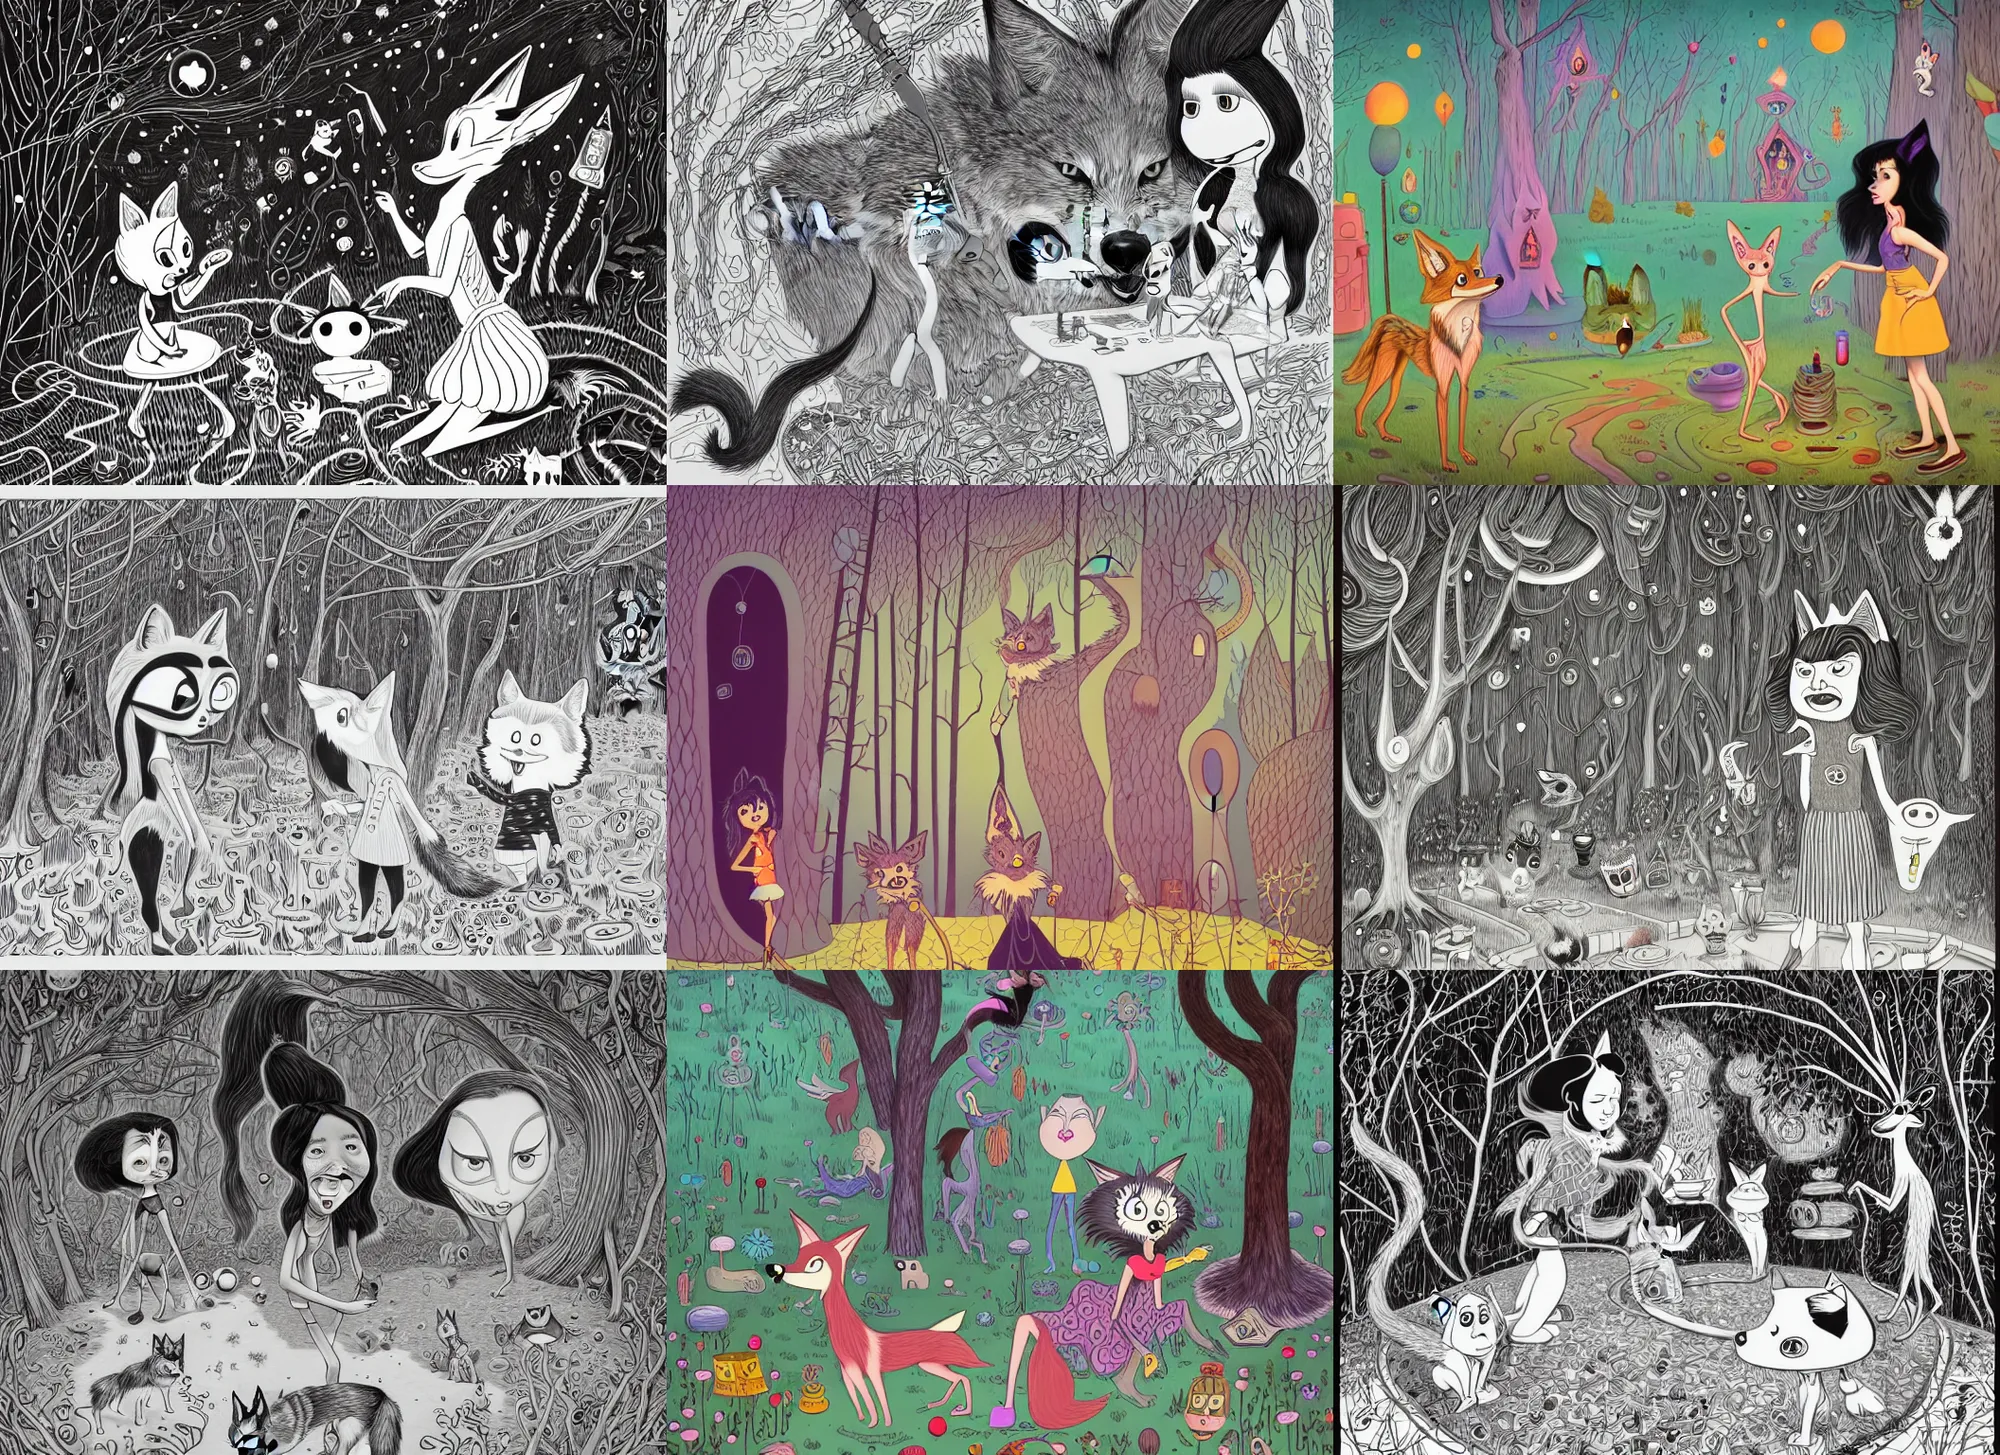 Prompt: a single magical coyote that crossed from another quantum dimension surprises a black haired girl while in her backyard. jon macnair, gary baseman, line drawing, carles dalmau, pedro correa, minna sundberg, xiaofan zhang, artstation, intricate and highly detailed, nettie wakefield, monica langlois